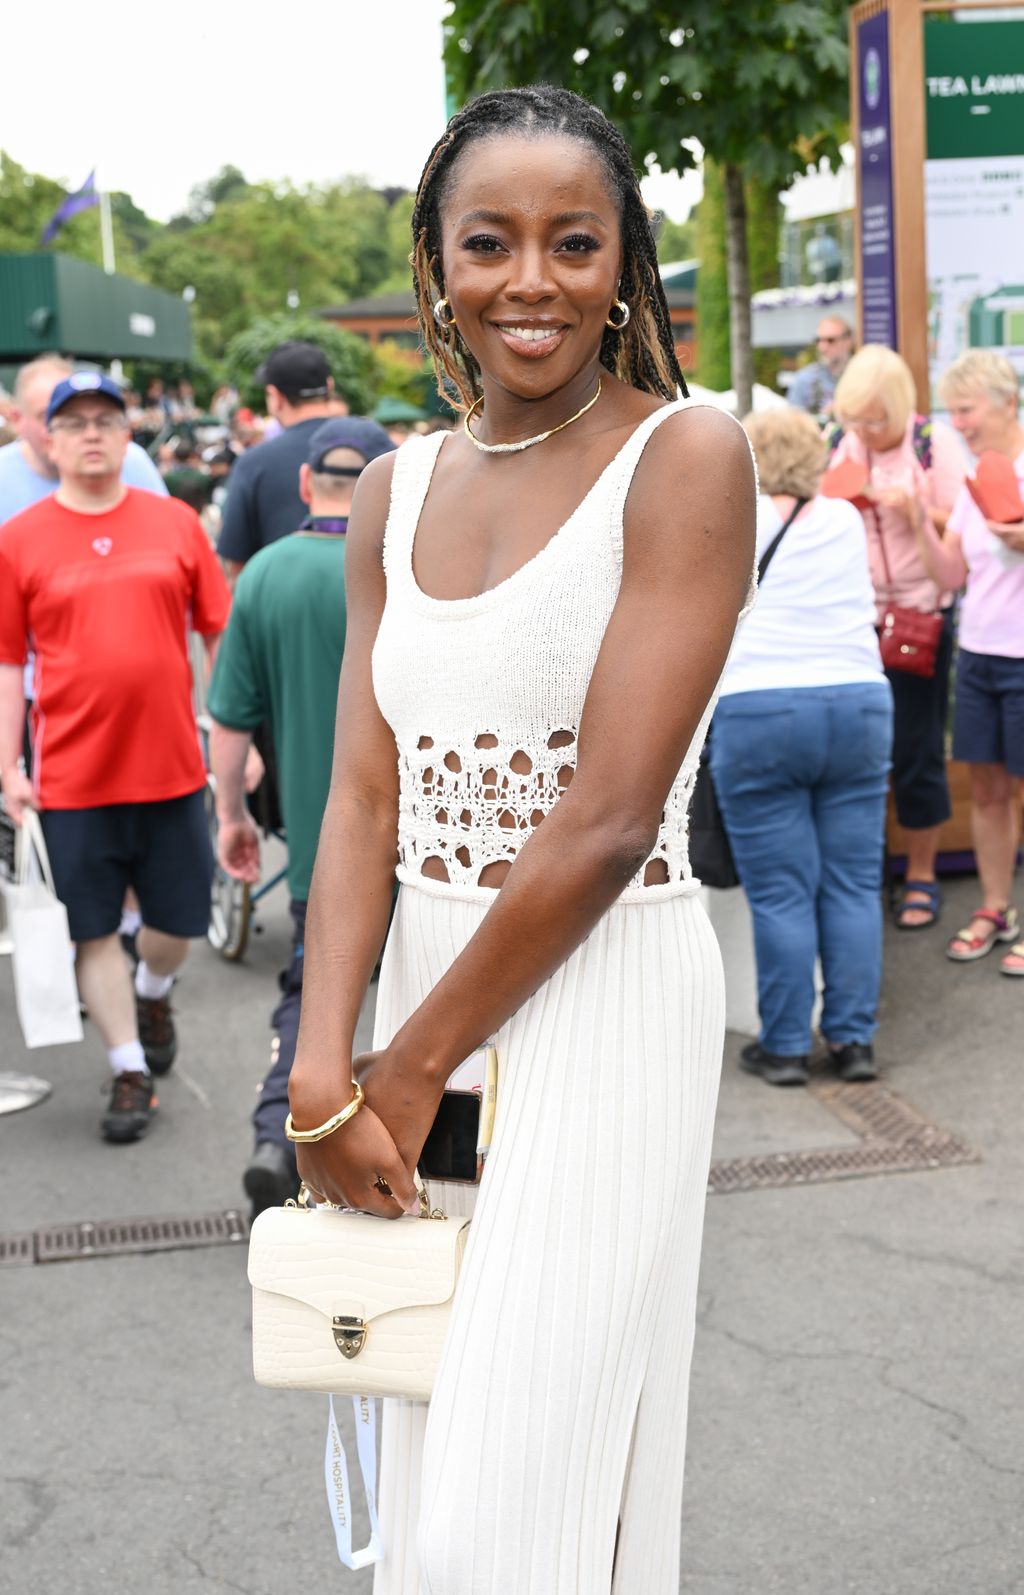 AJ Odudu looked effortlessly chic in a whire crochet dress with an Aspinal of London bag.